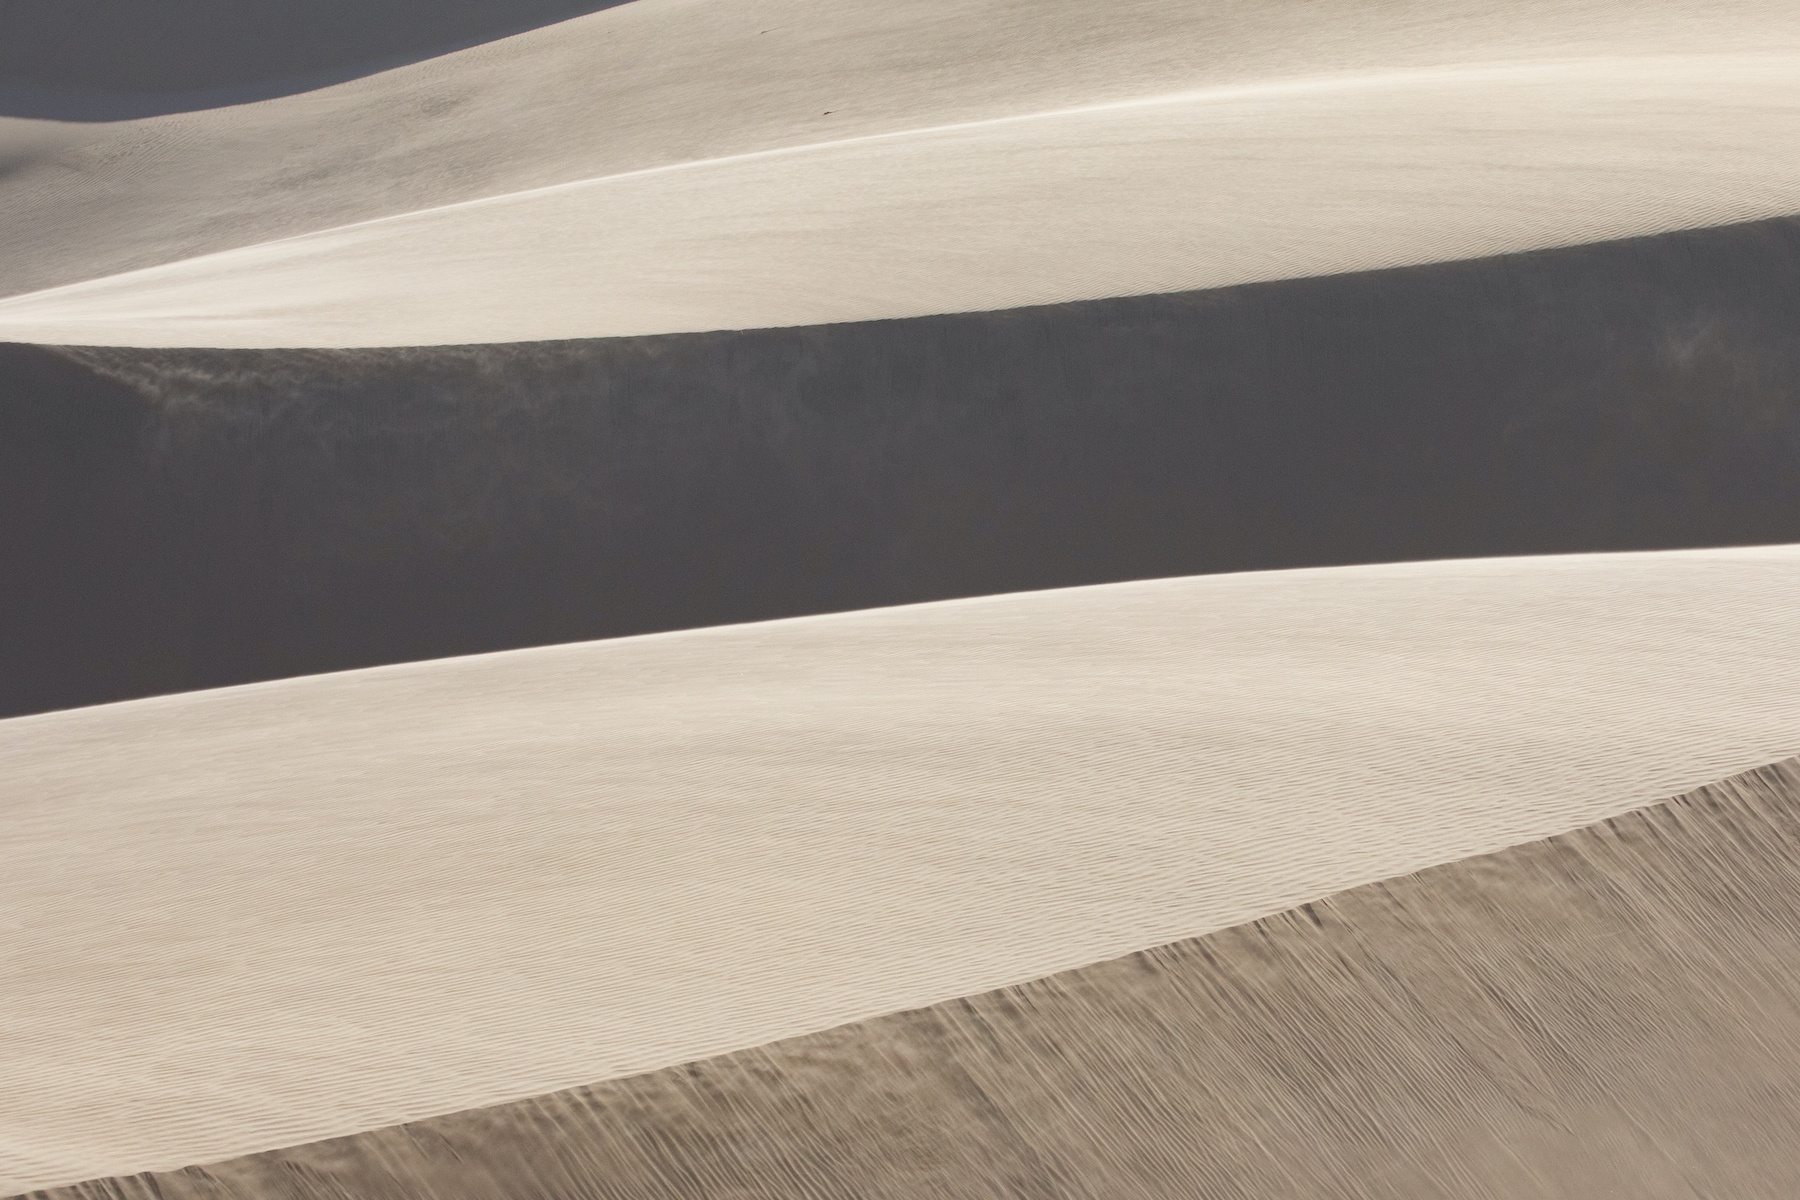 Layered dunes at Sandwich Harbour during our Namibia photography tour